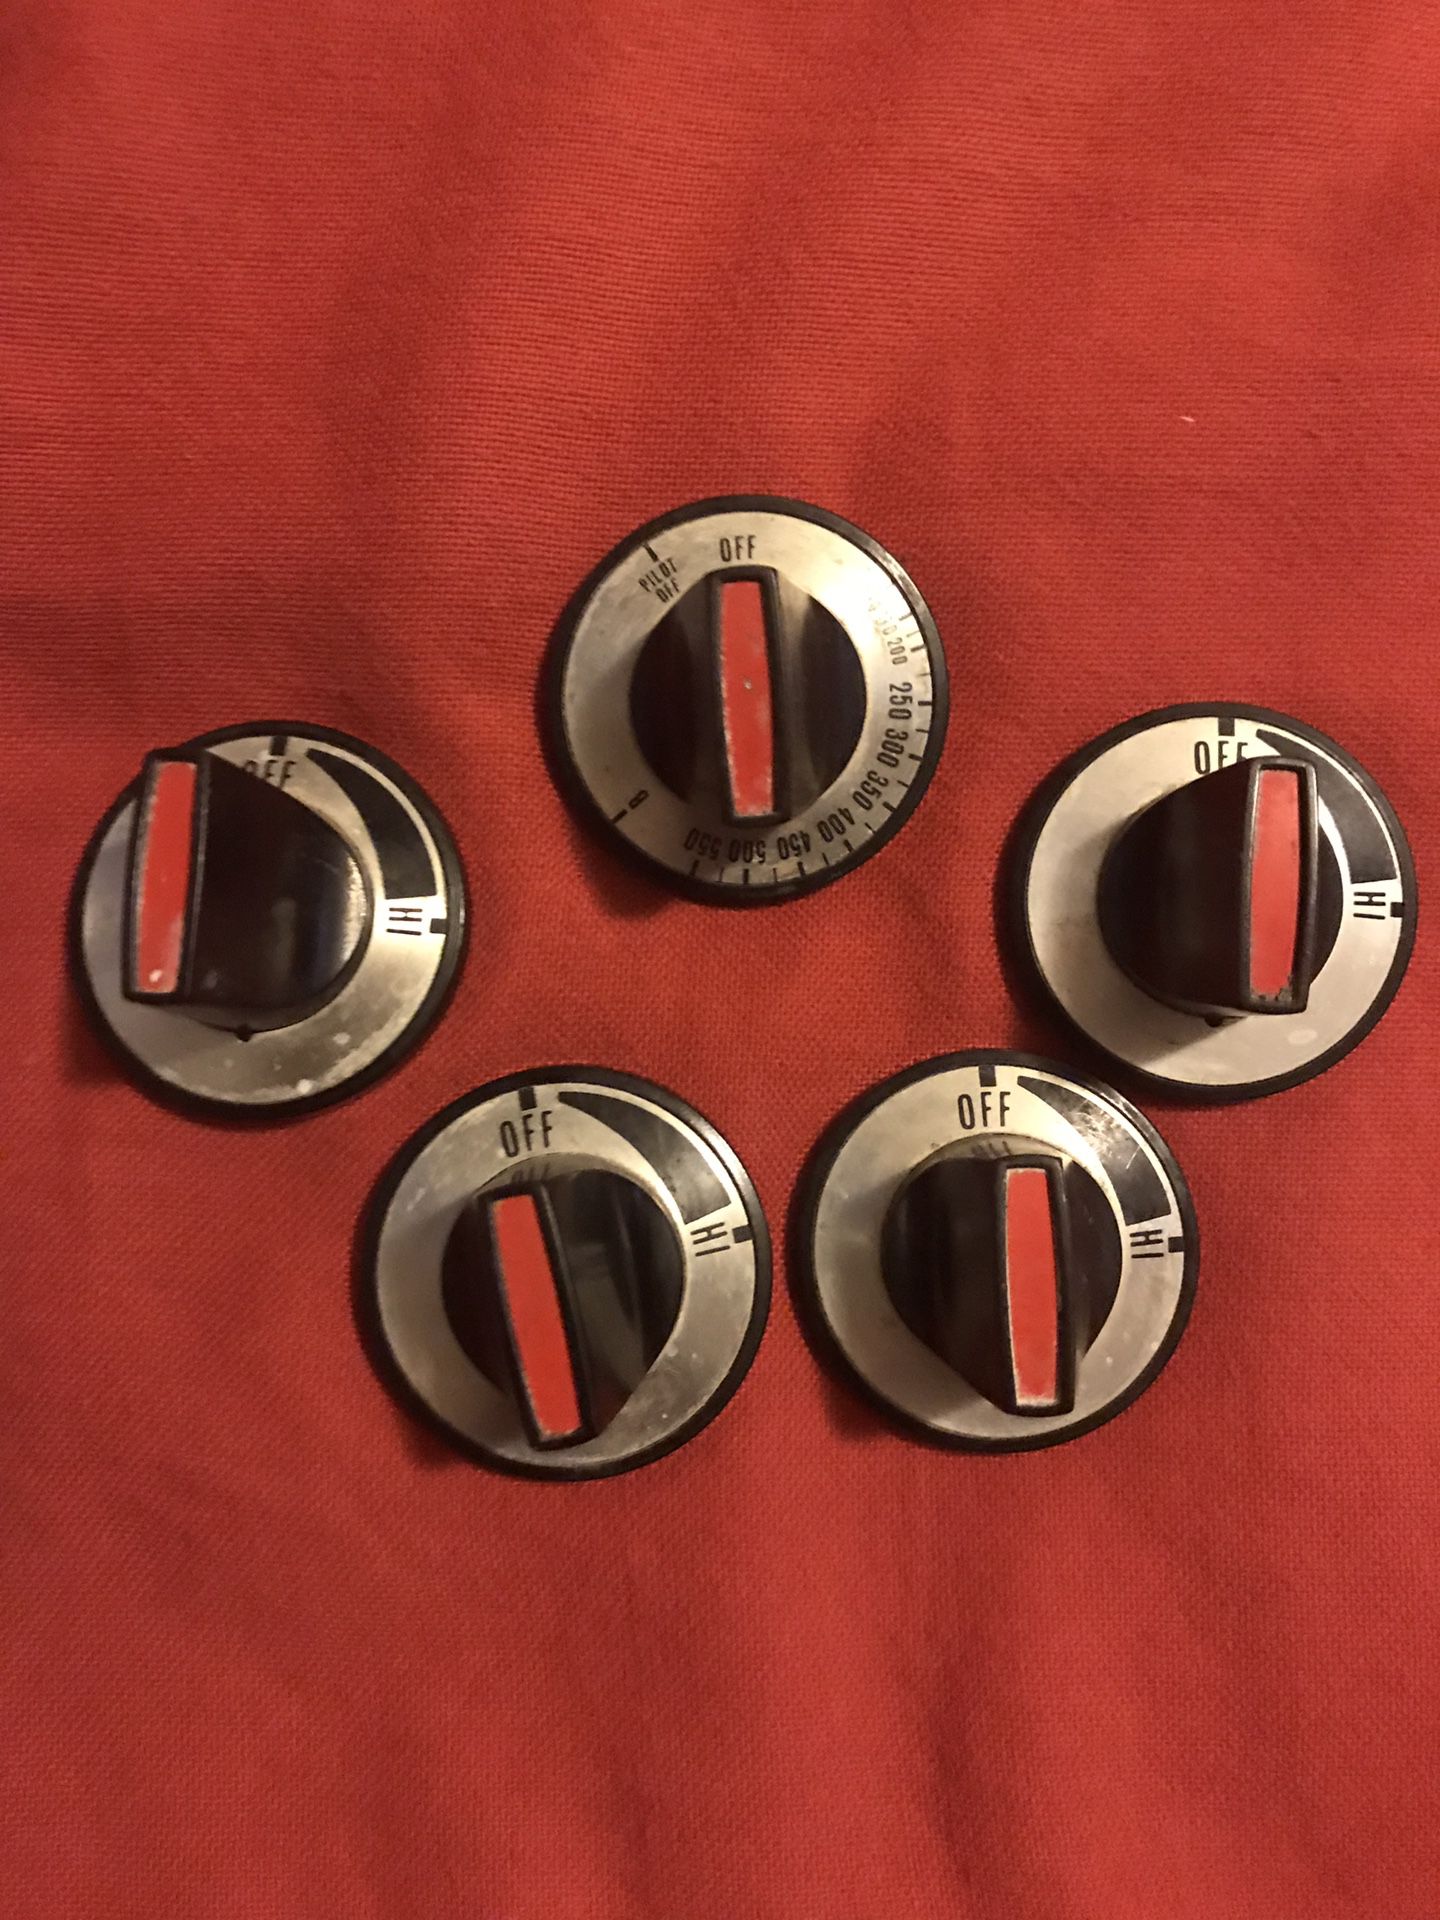 Oven knobs for small motorhome or RV stove $10